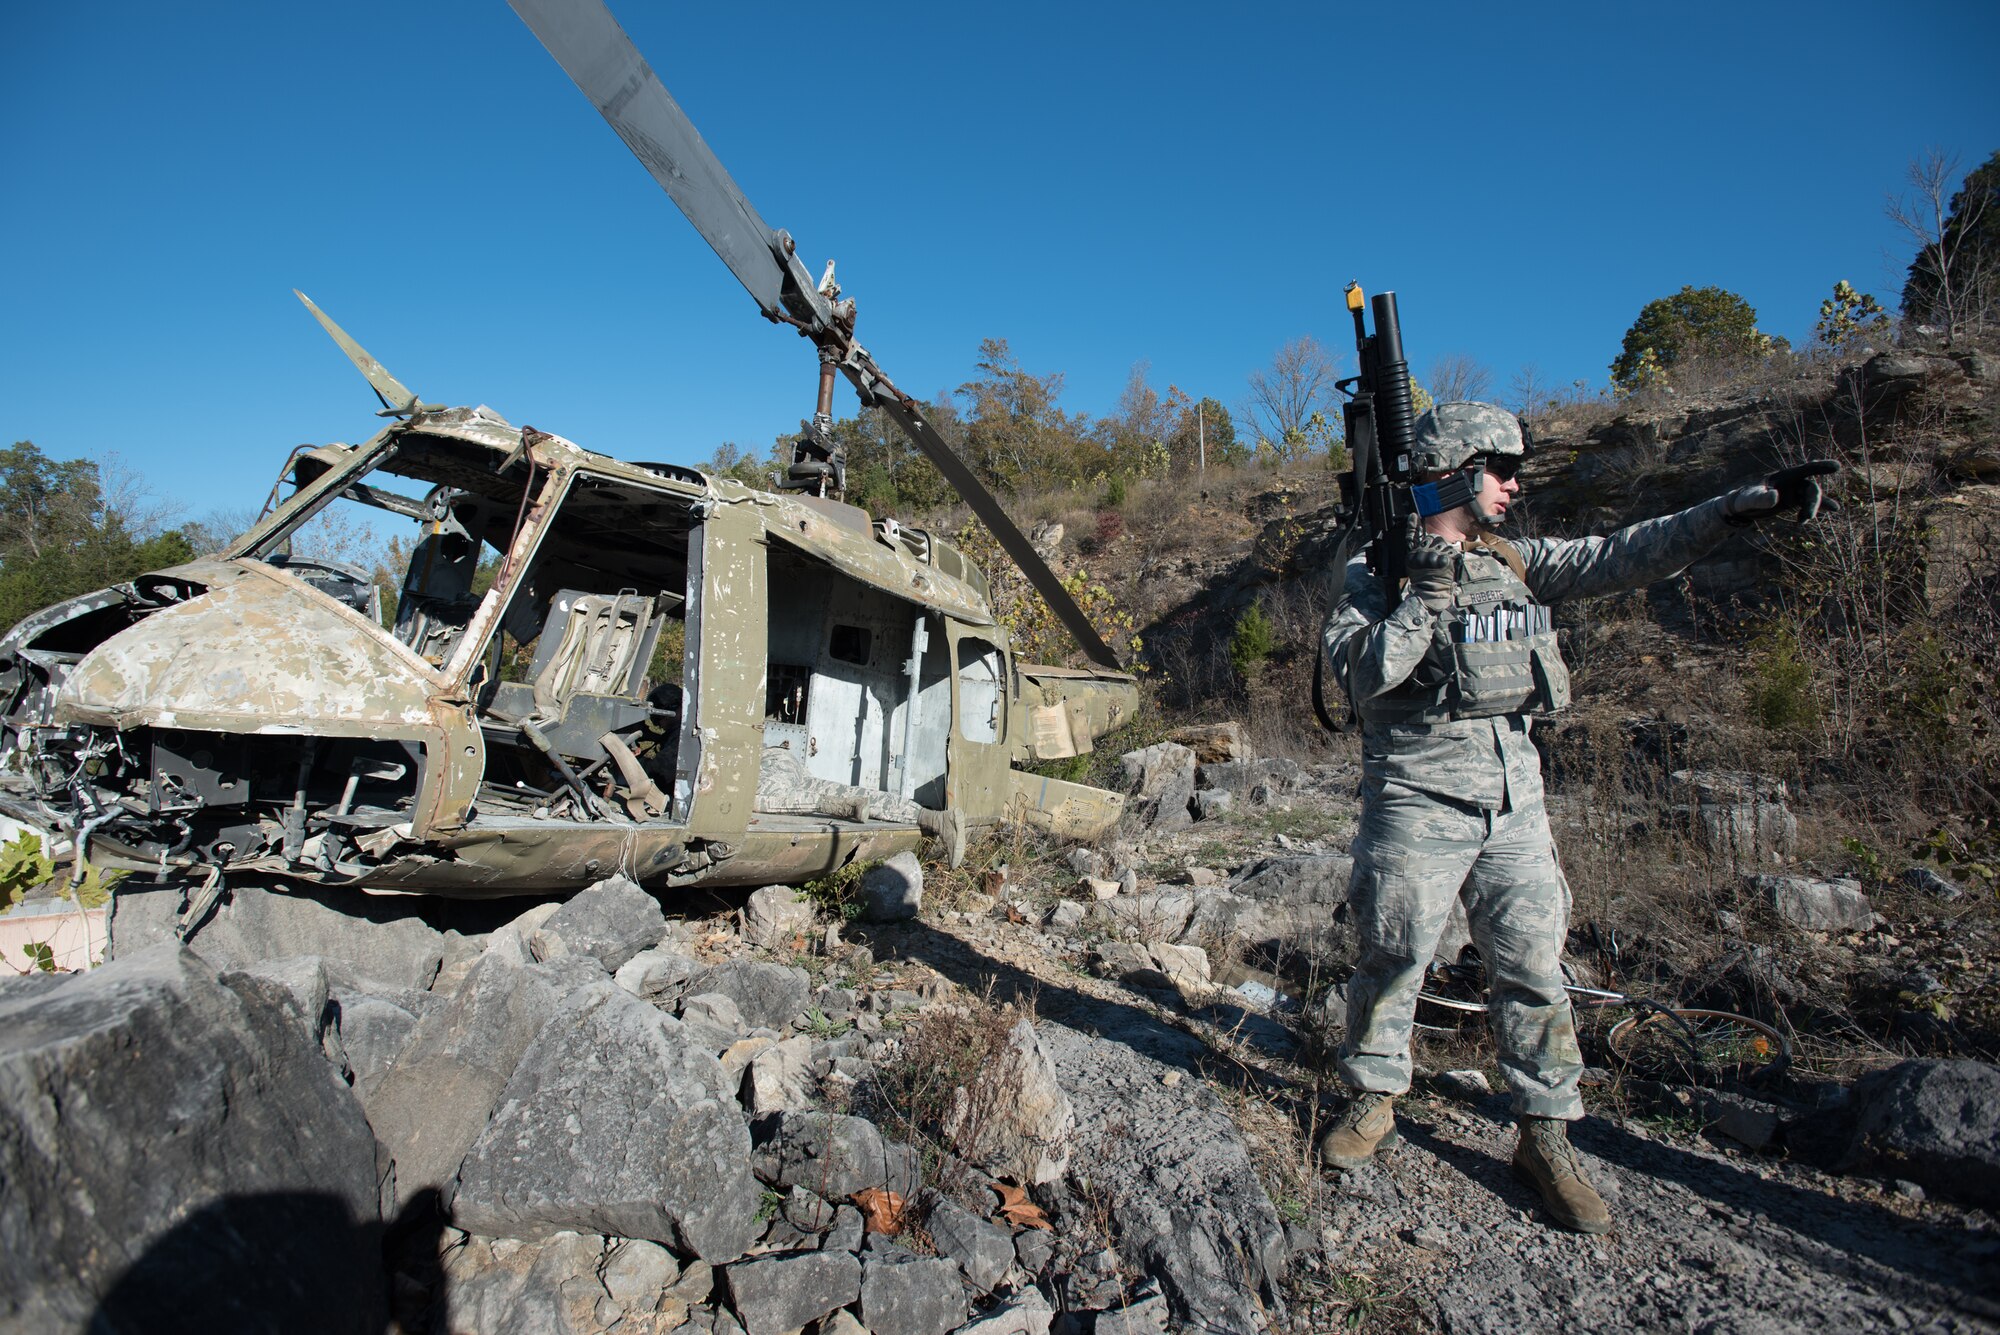 Senior Airman Randy Roberts, a Fire Team leader from the Kentucky Air National Guard’s 123rd Security Forces Squadron, directs efforts to recover a simulated downed pilot inside a mock Afghan Village at Fort Knox, Ky., Oct. 20, 2015. Roberts and his fellow Airmen were required to execute a coordinated search while defending their positions and engaging hostile forces. (U.S. Air National Guard photo by Maj. Dale Greer)